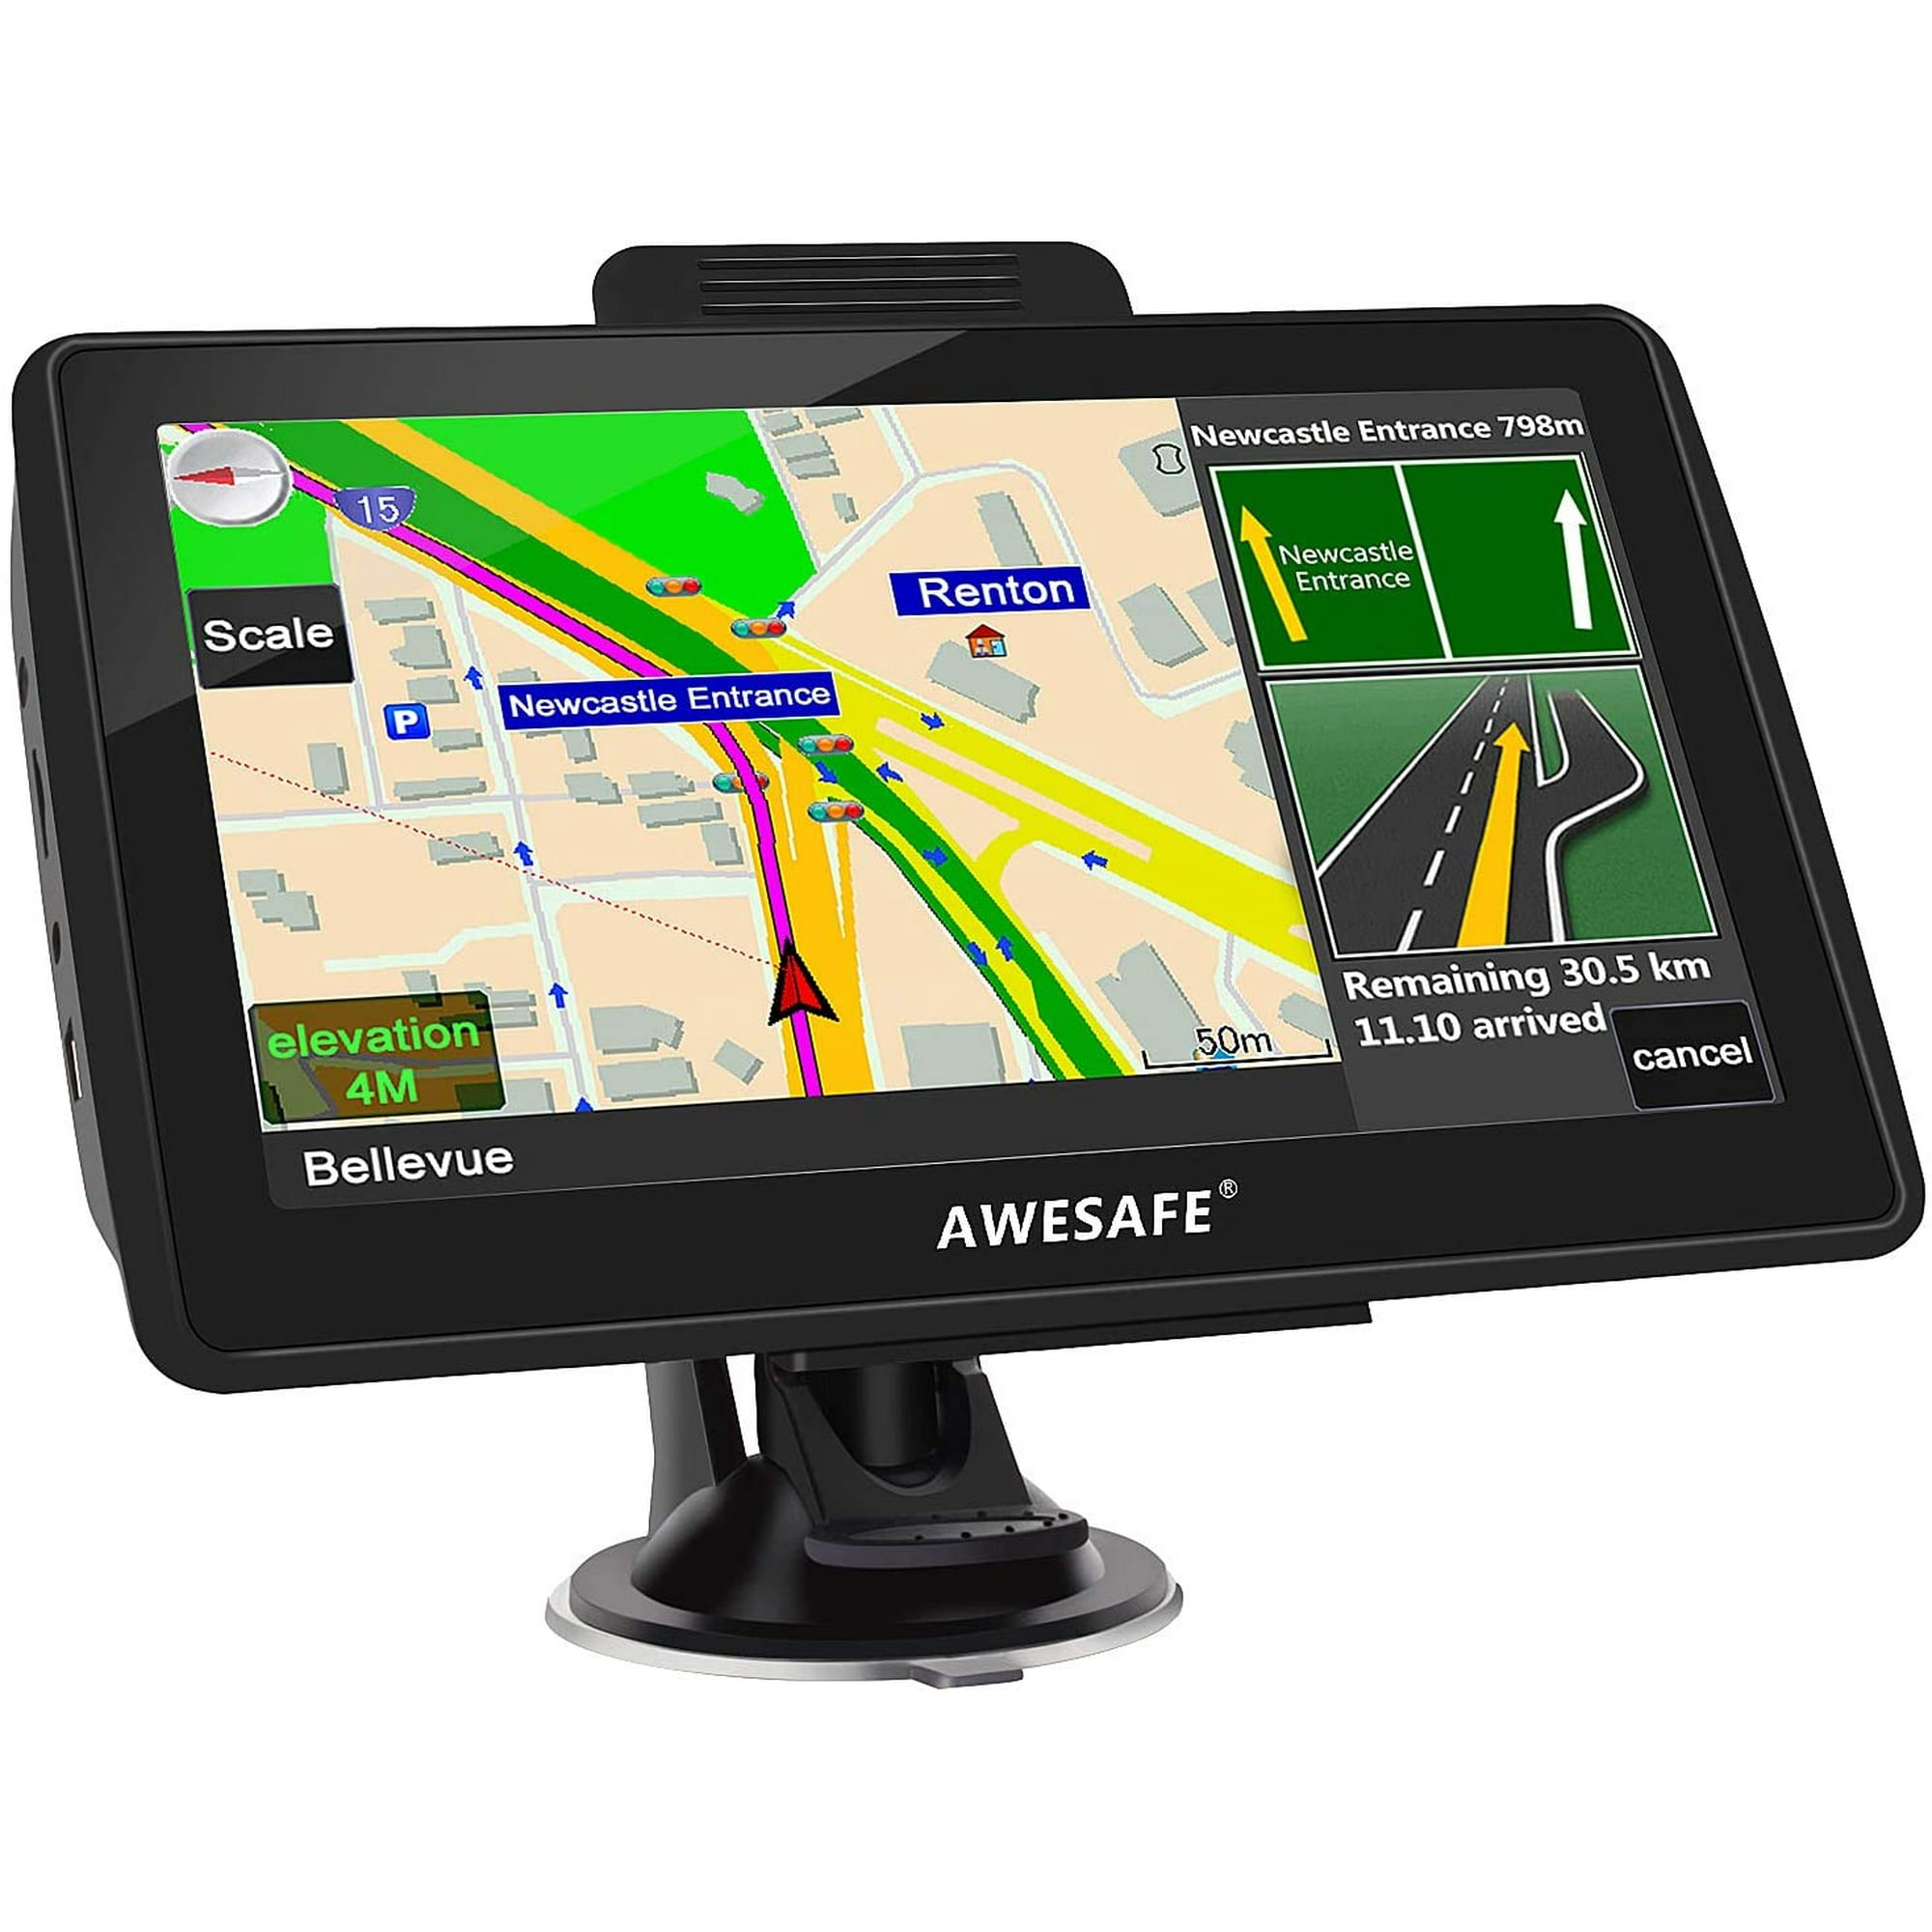 Awesafe Gps Navigation For Car 7 Inches Touch Screen Car Gps Navigation System North America Lifetime Map Updates Walmart Canada